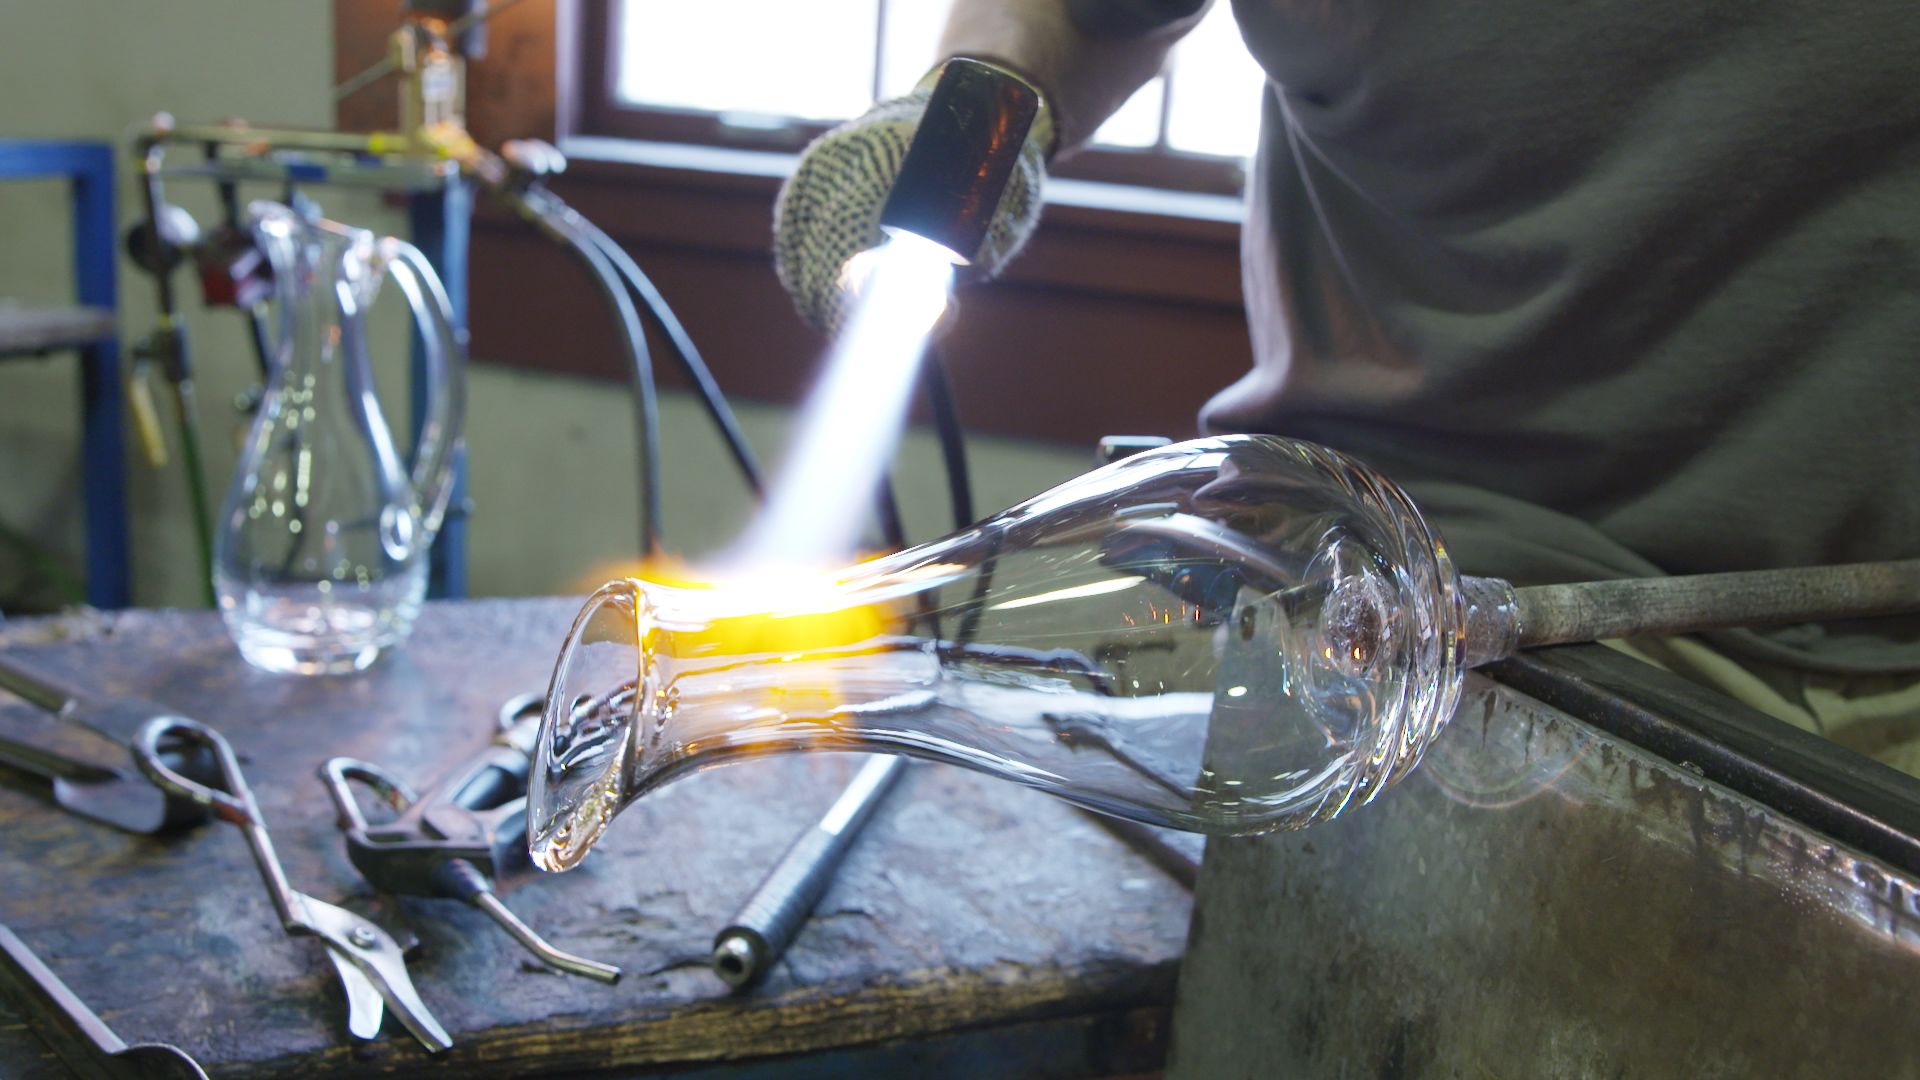 How Simon Pearce Makes Glass Pitchers - Glass-Blowing Video